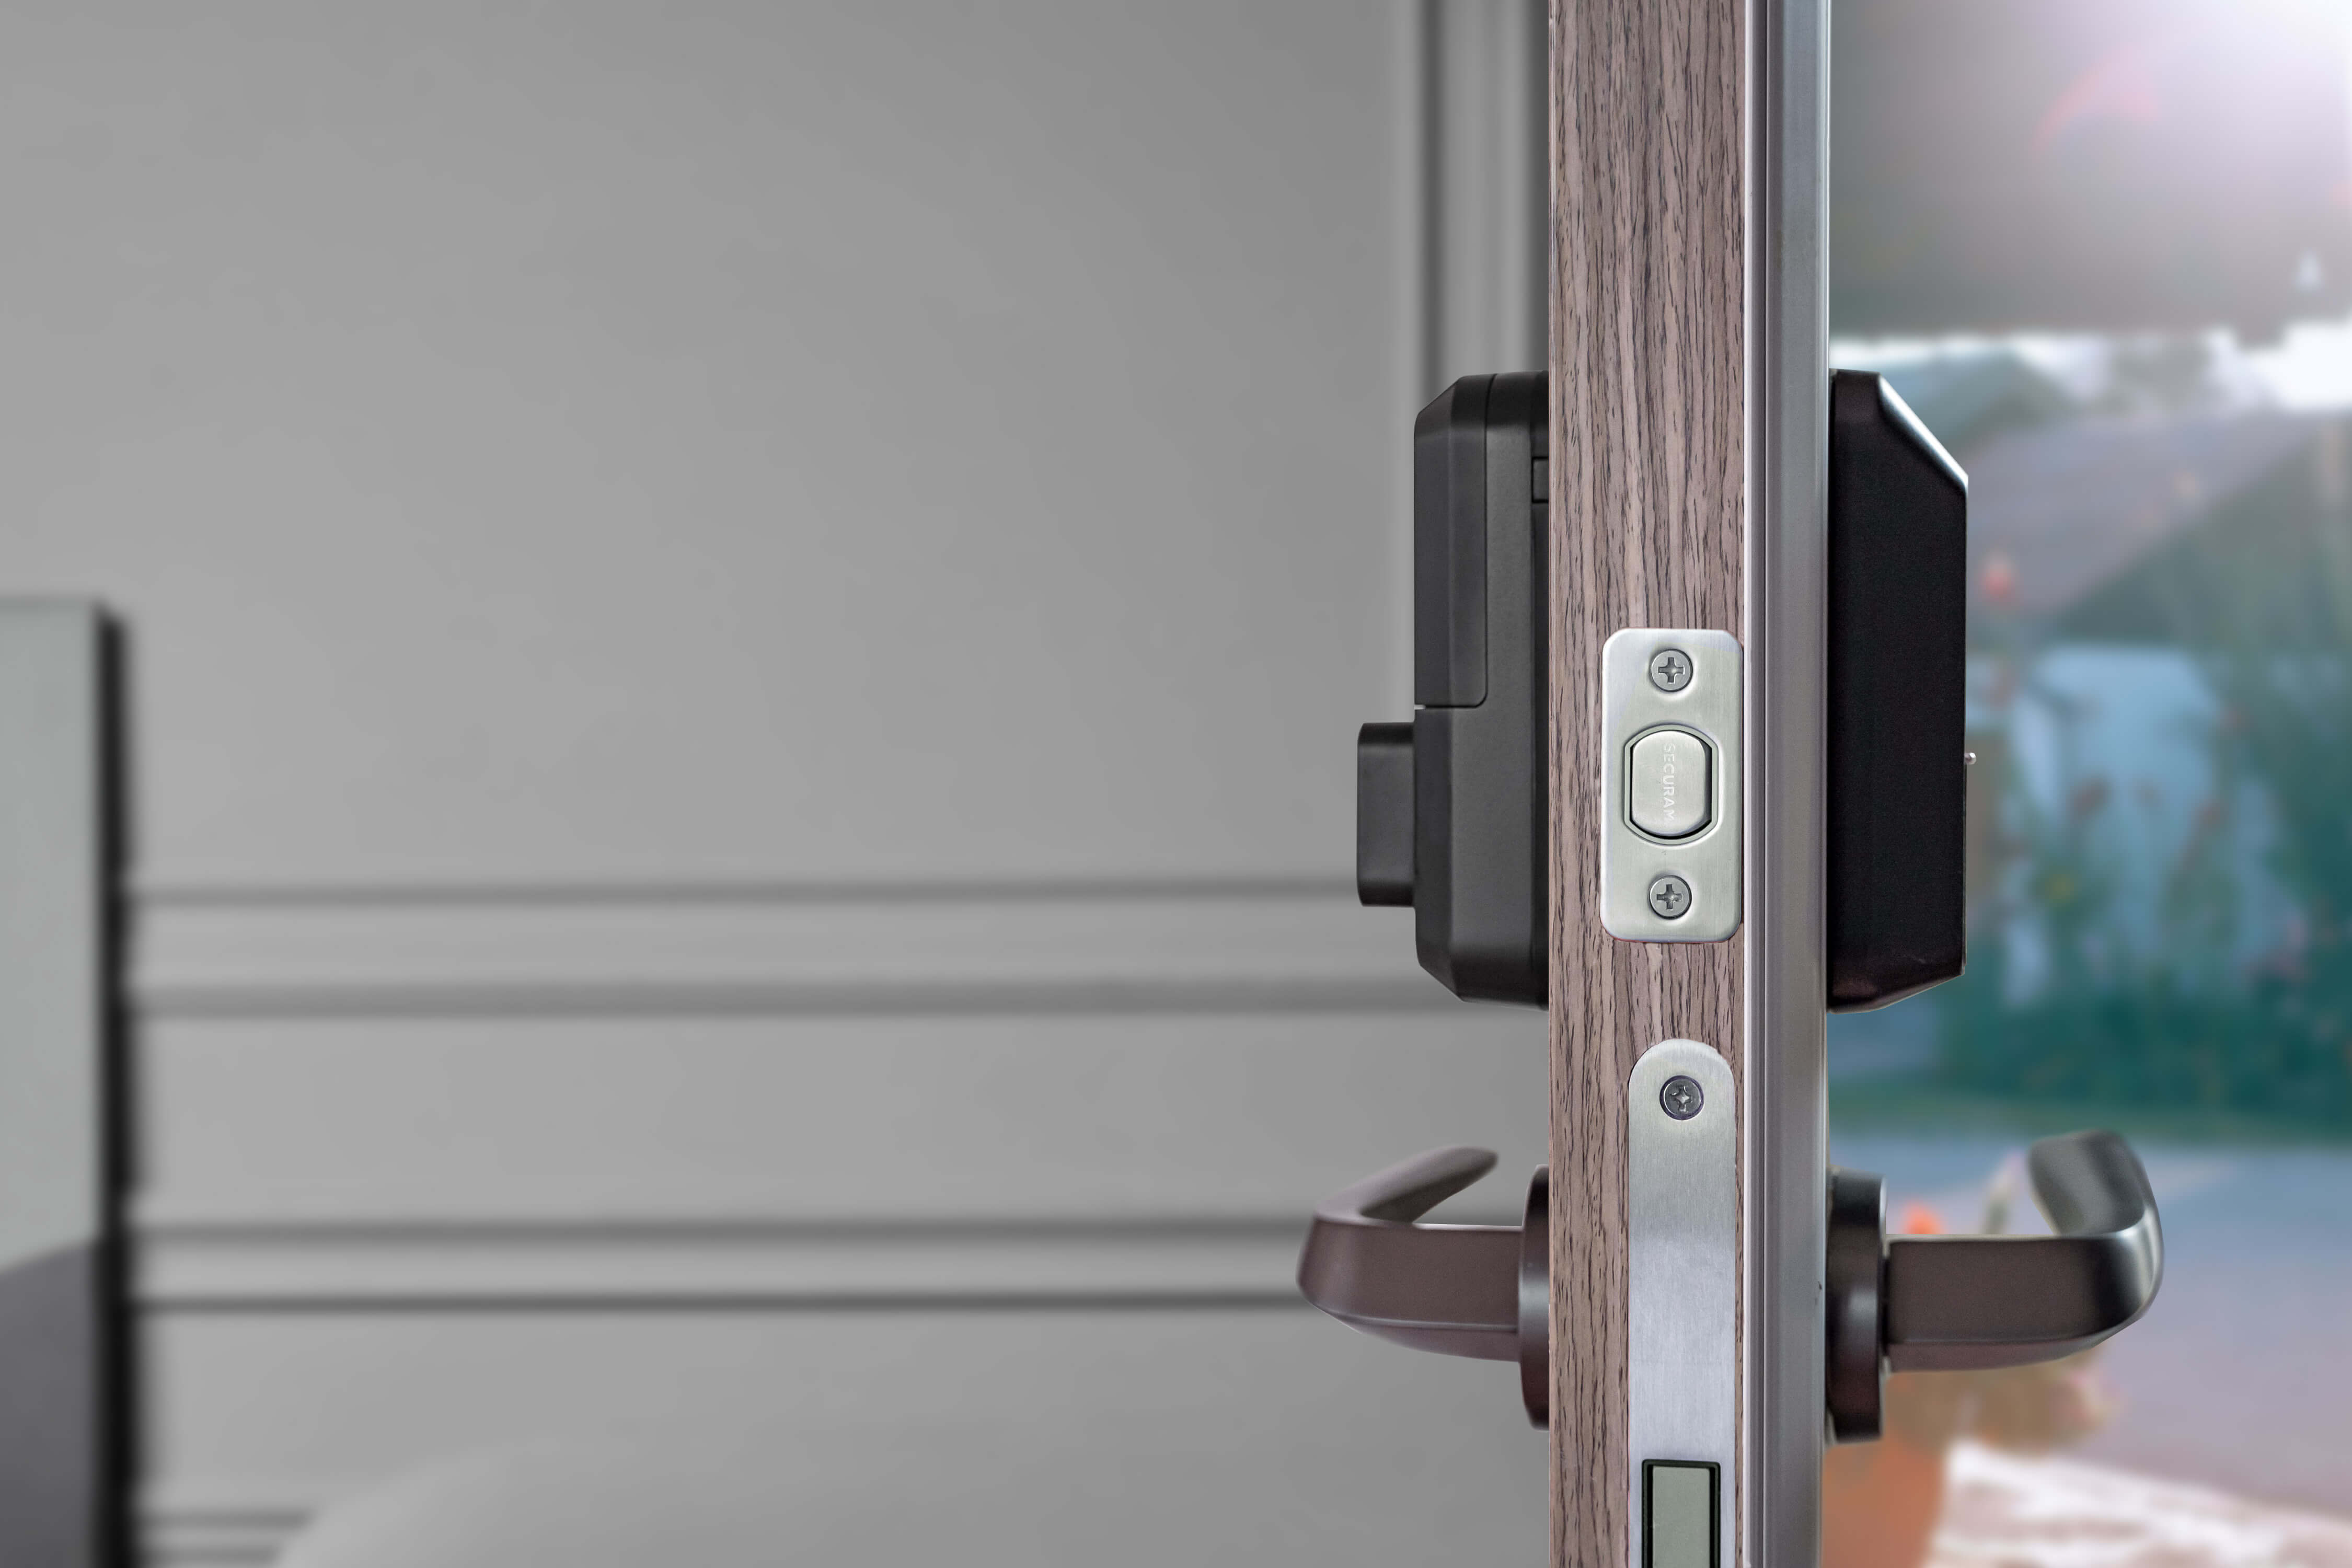 EASY TO INSTALL Install in just 15 minutes.  The app will guide you step-by-step. SECURAM EOS fits on most doors. 